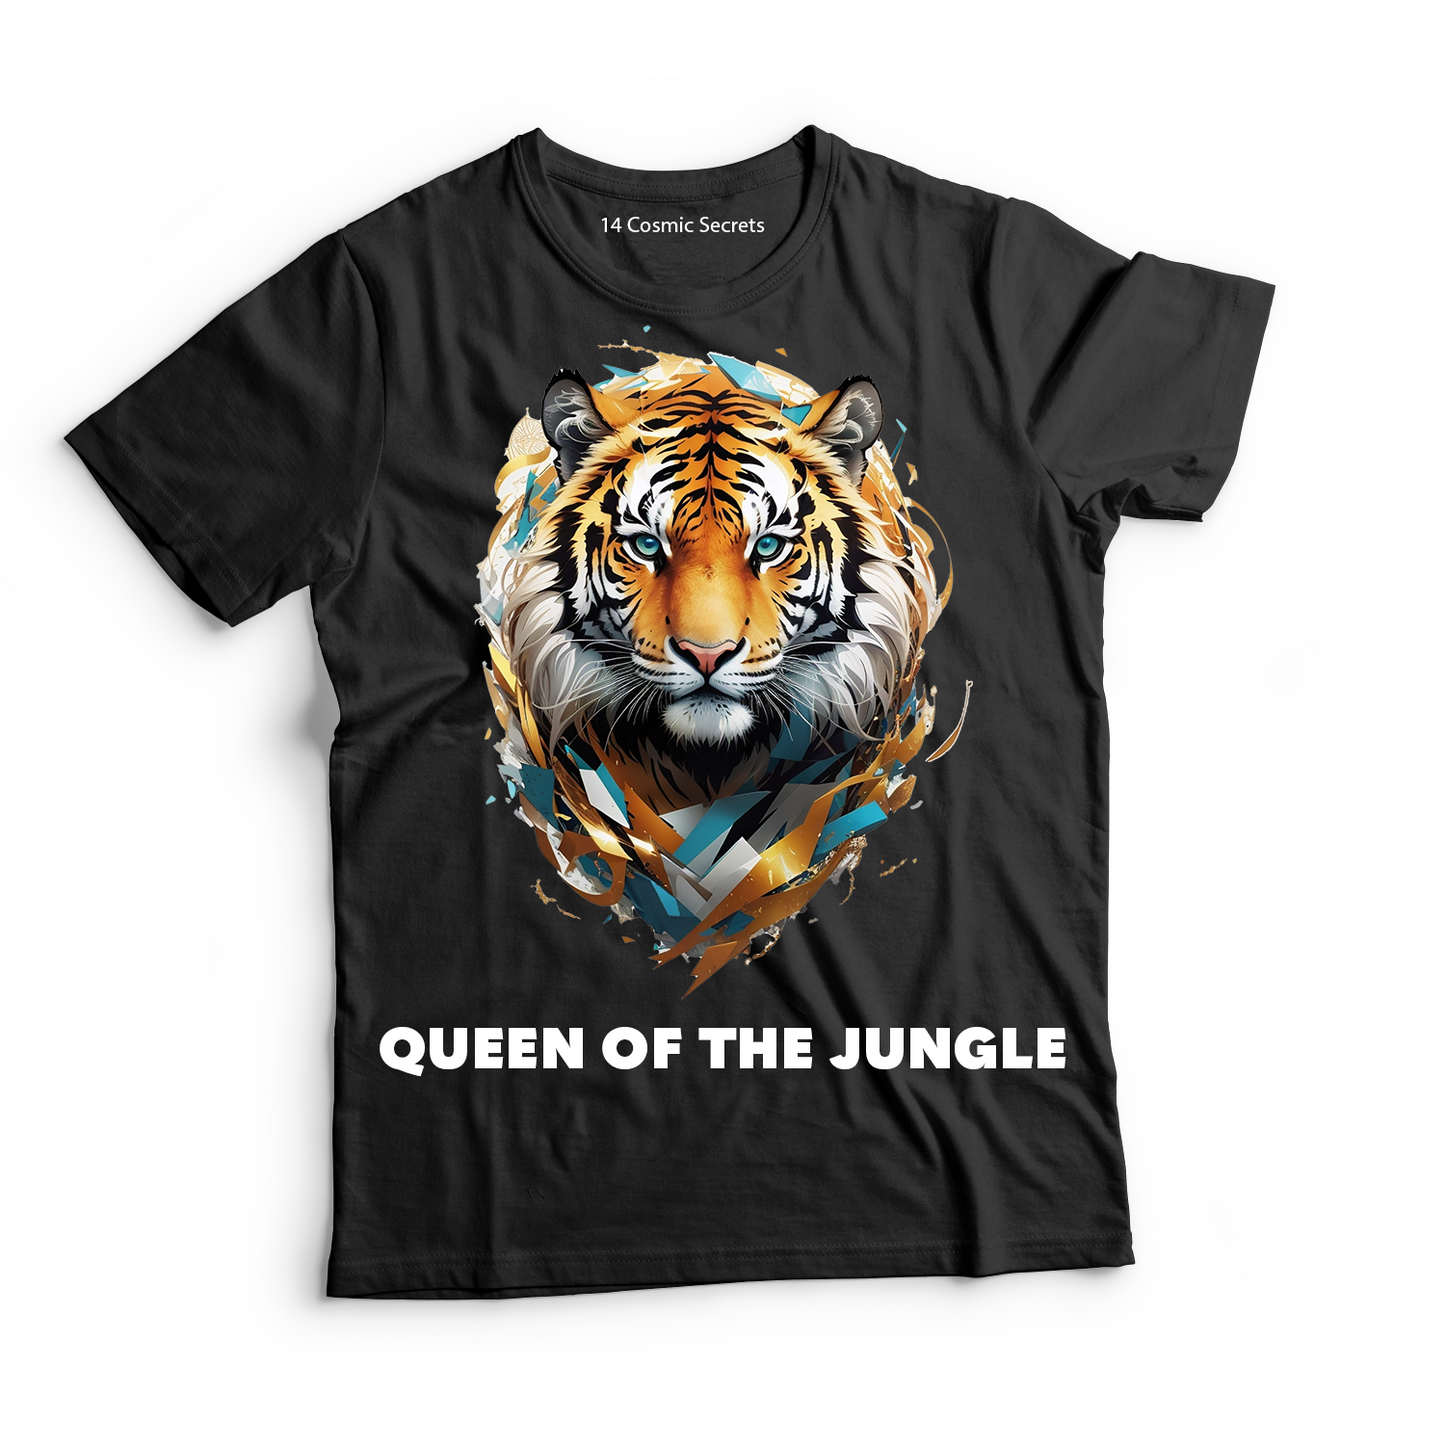 King of the Jungle Graphic Printed T-Shirt  Cotton T-Shirt Magnificence of India T-Shirt 🐯🐯🐯🐯🐯